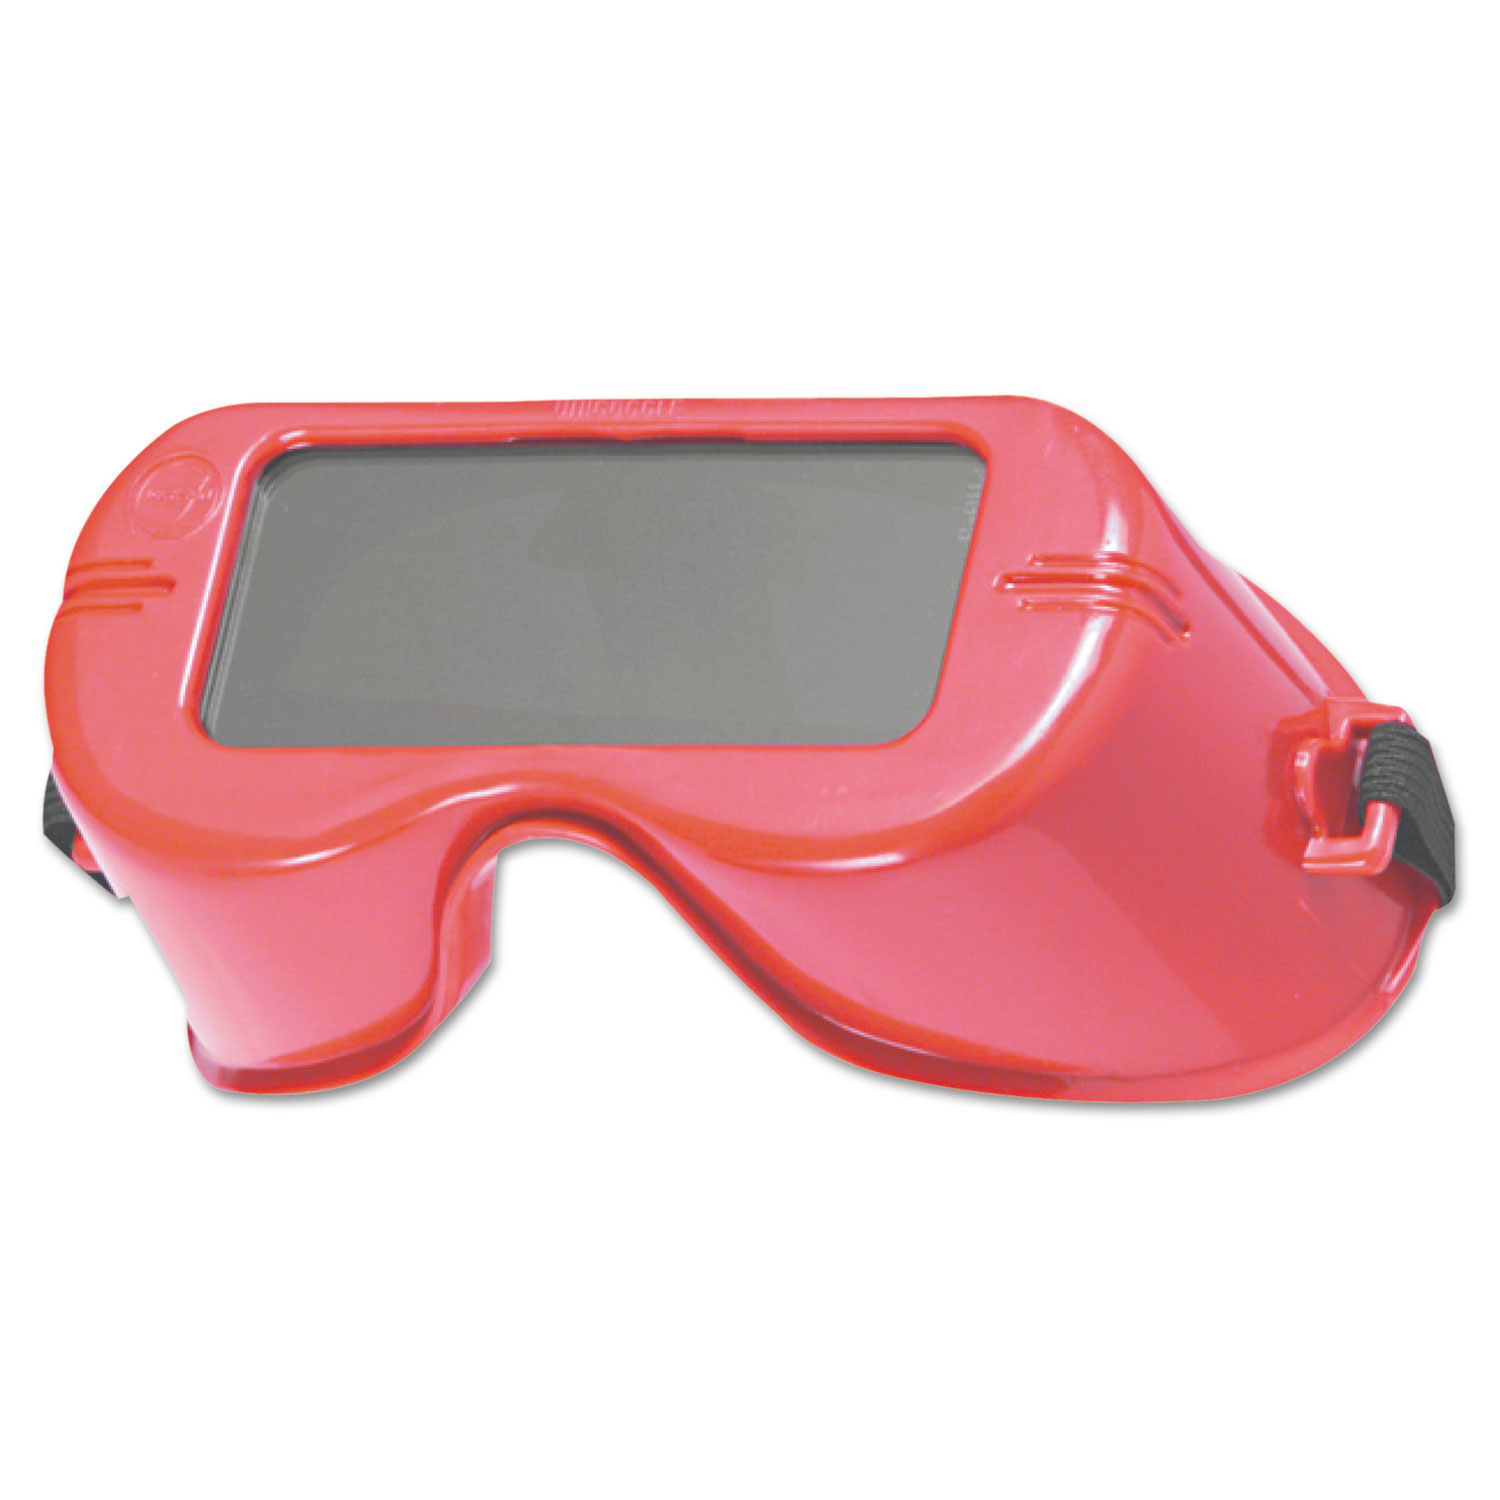 WR-60 Cutting Goggles, Red Frame, Shade 5.0 Lens